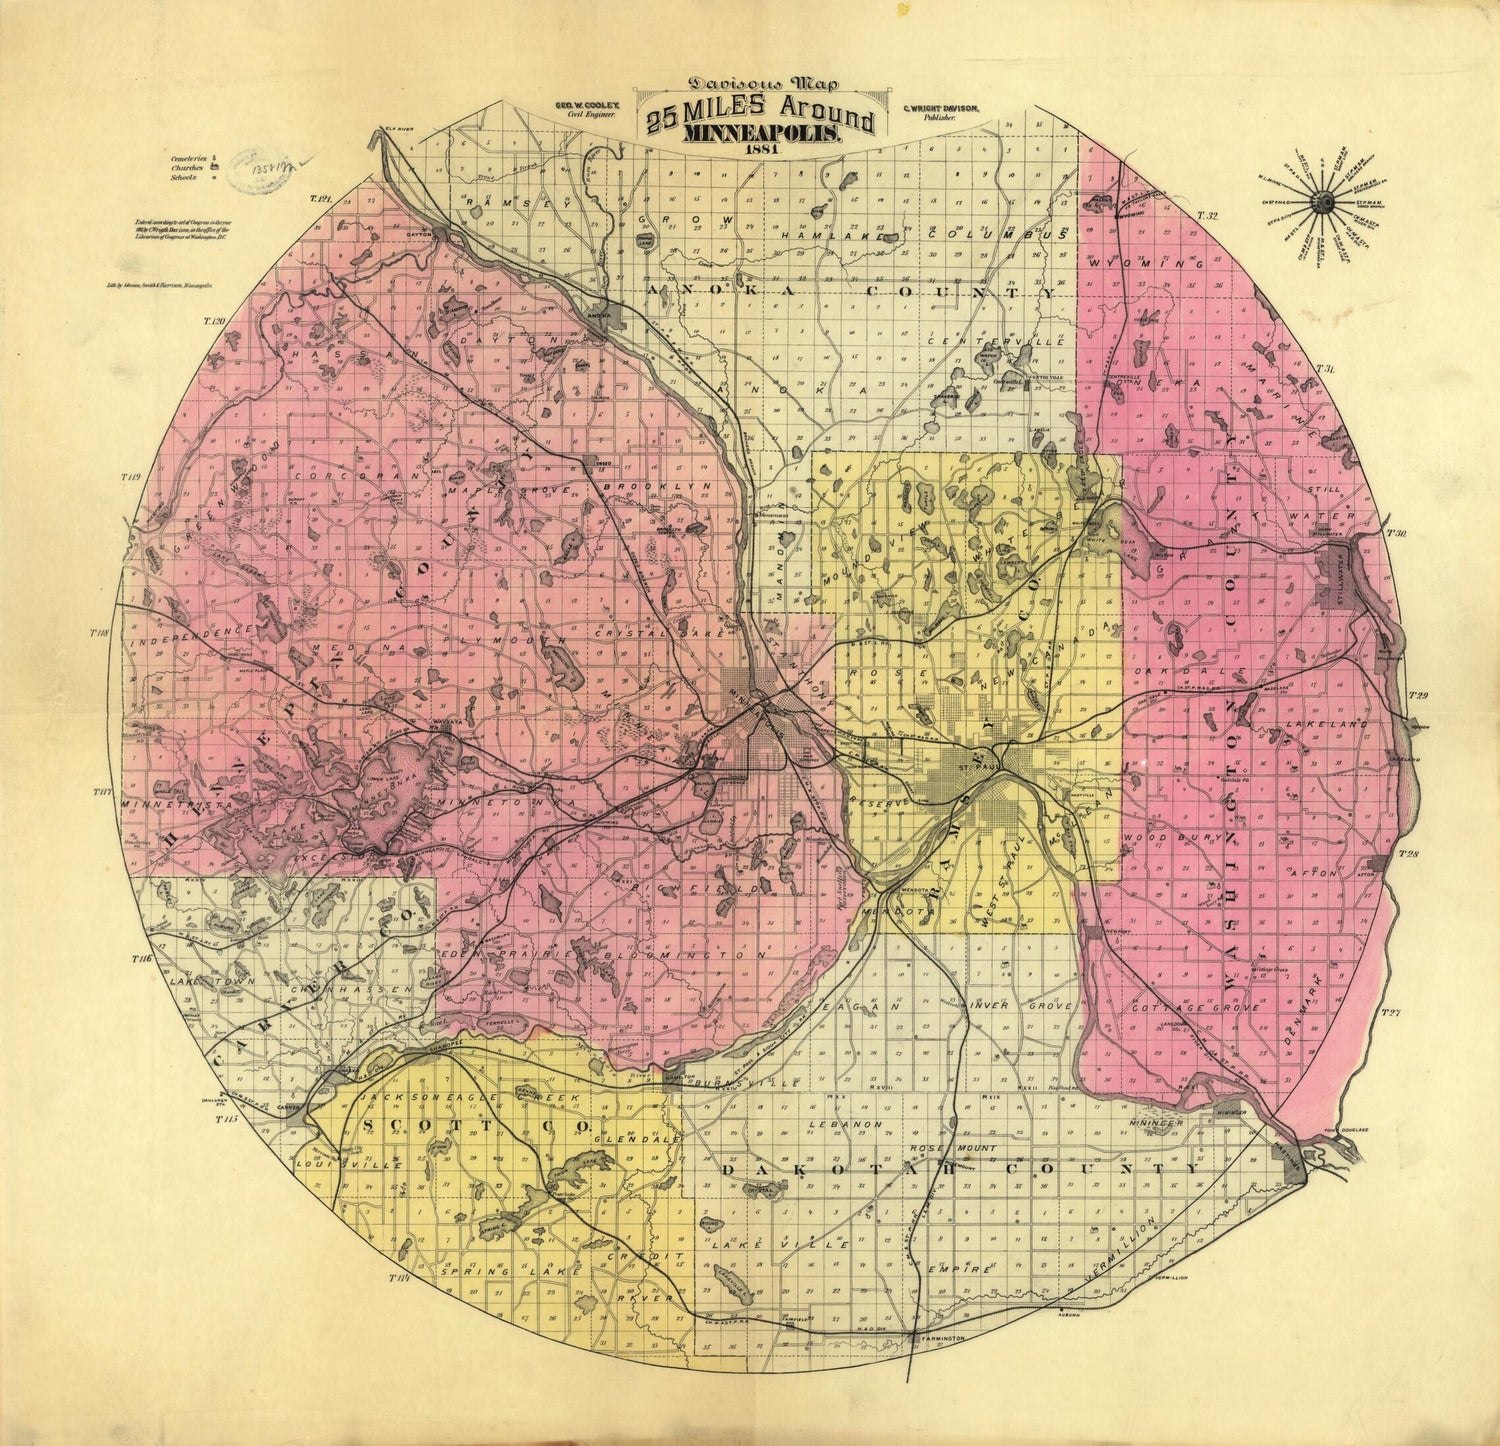 This old map of Davisons Map 25 Miles Around Minneapolis from 1881 was created by C. Wright Davison in 1881